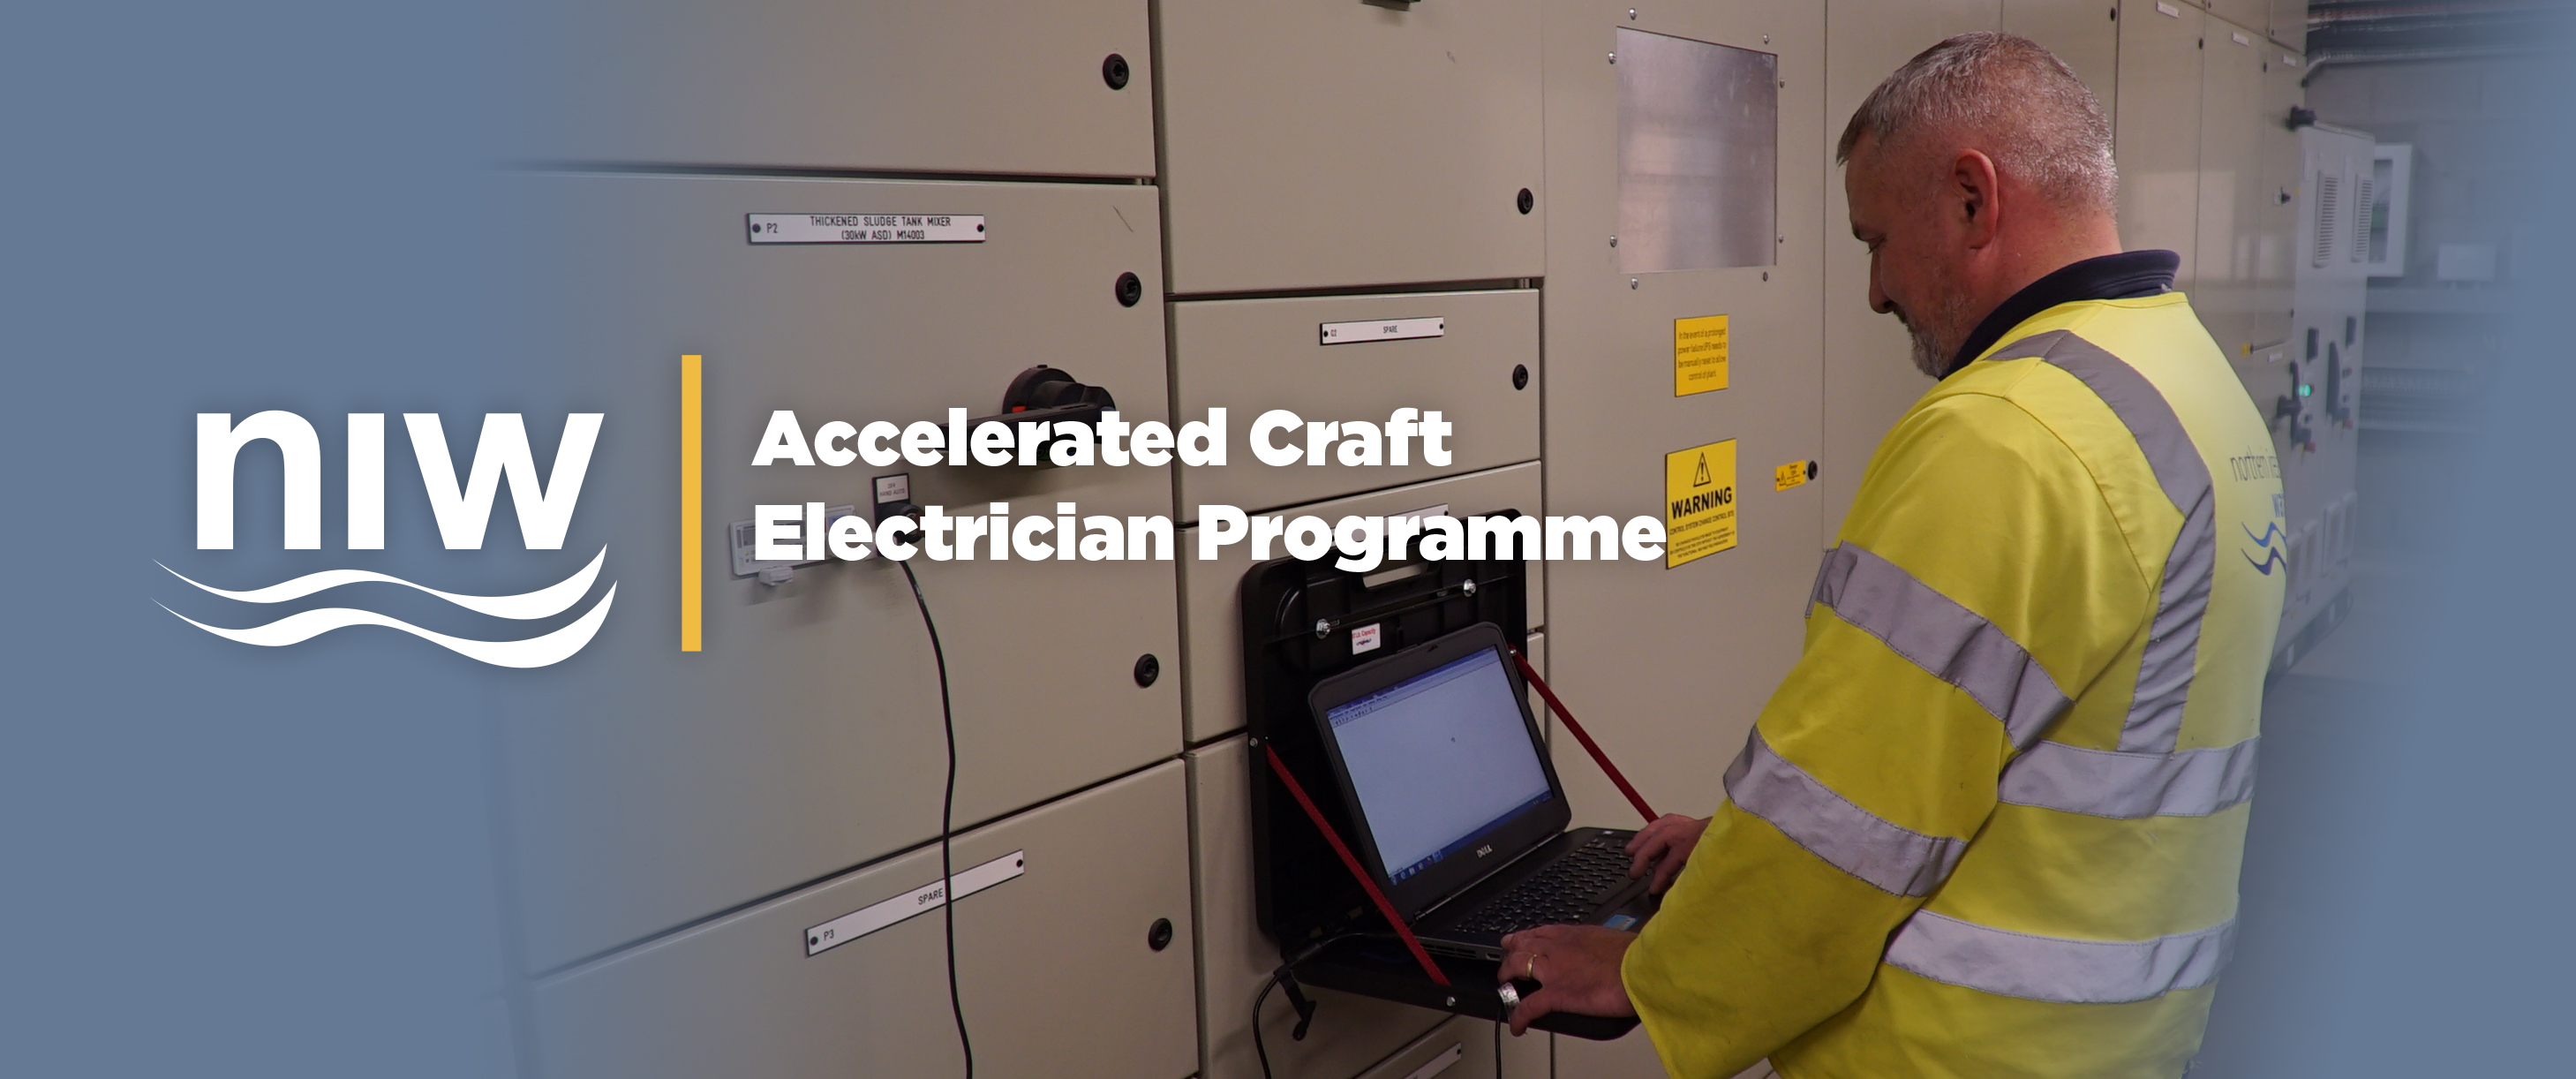 Accelerated Craft Electrician Programme